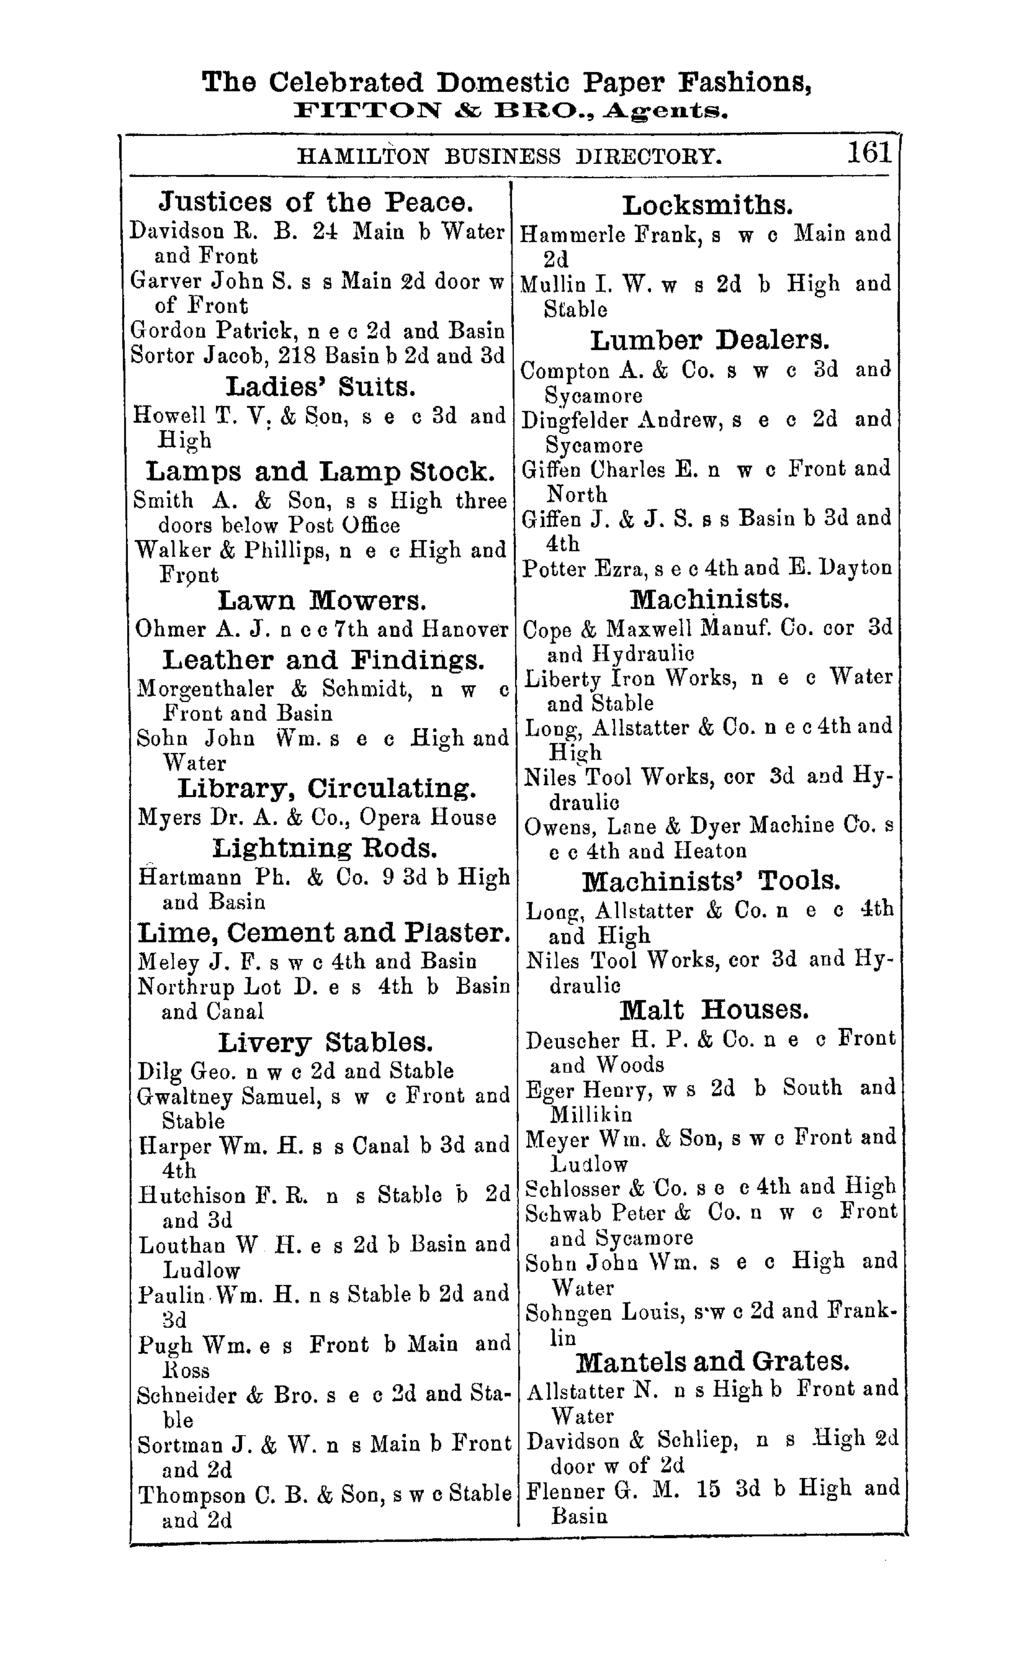 The Celebrated Do.mestic Paper Fashions, FITTON & BRO., Agen"ts. HAMILTON BUSINESS DIRECTORY. 161 Justices of the Peace. Davidson R. B. 24 Main b Water and Front Garver John S.